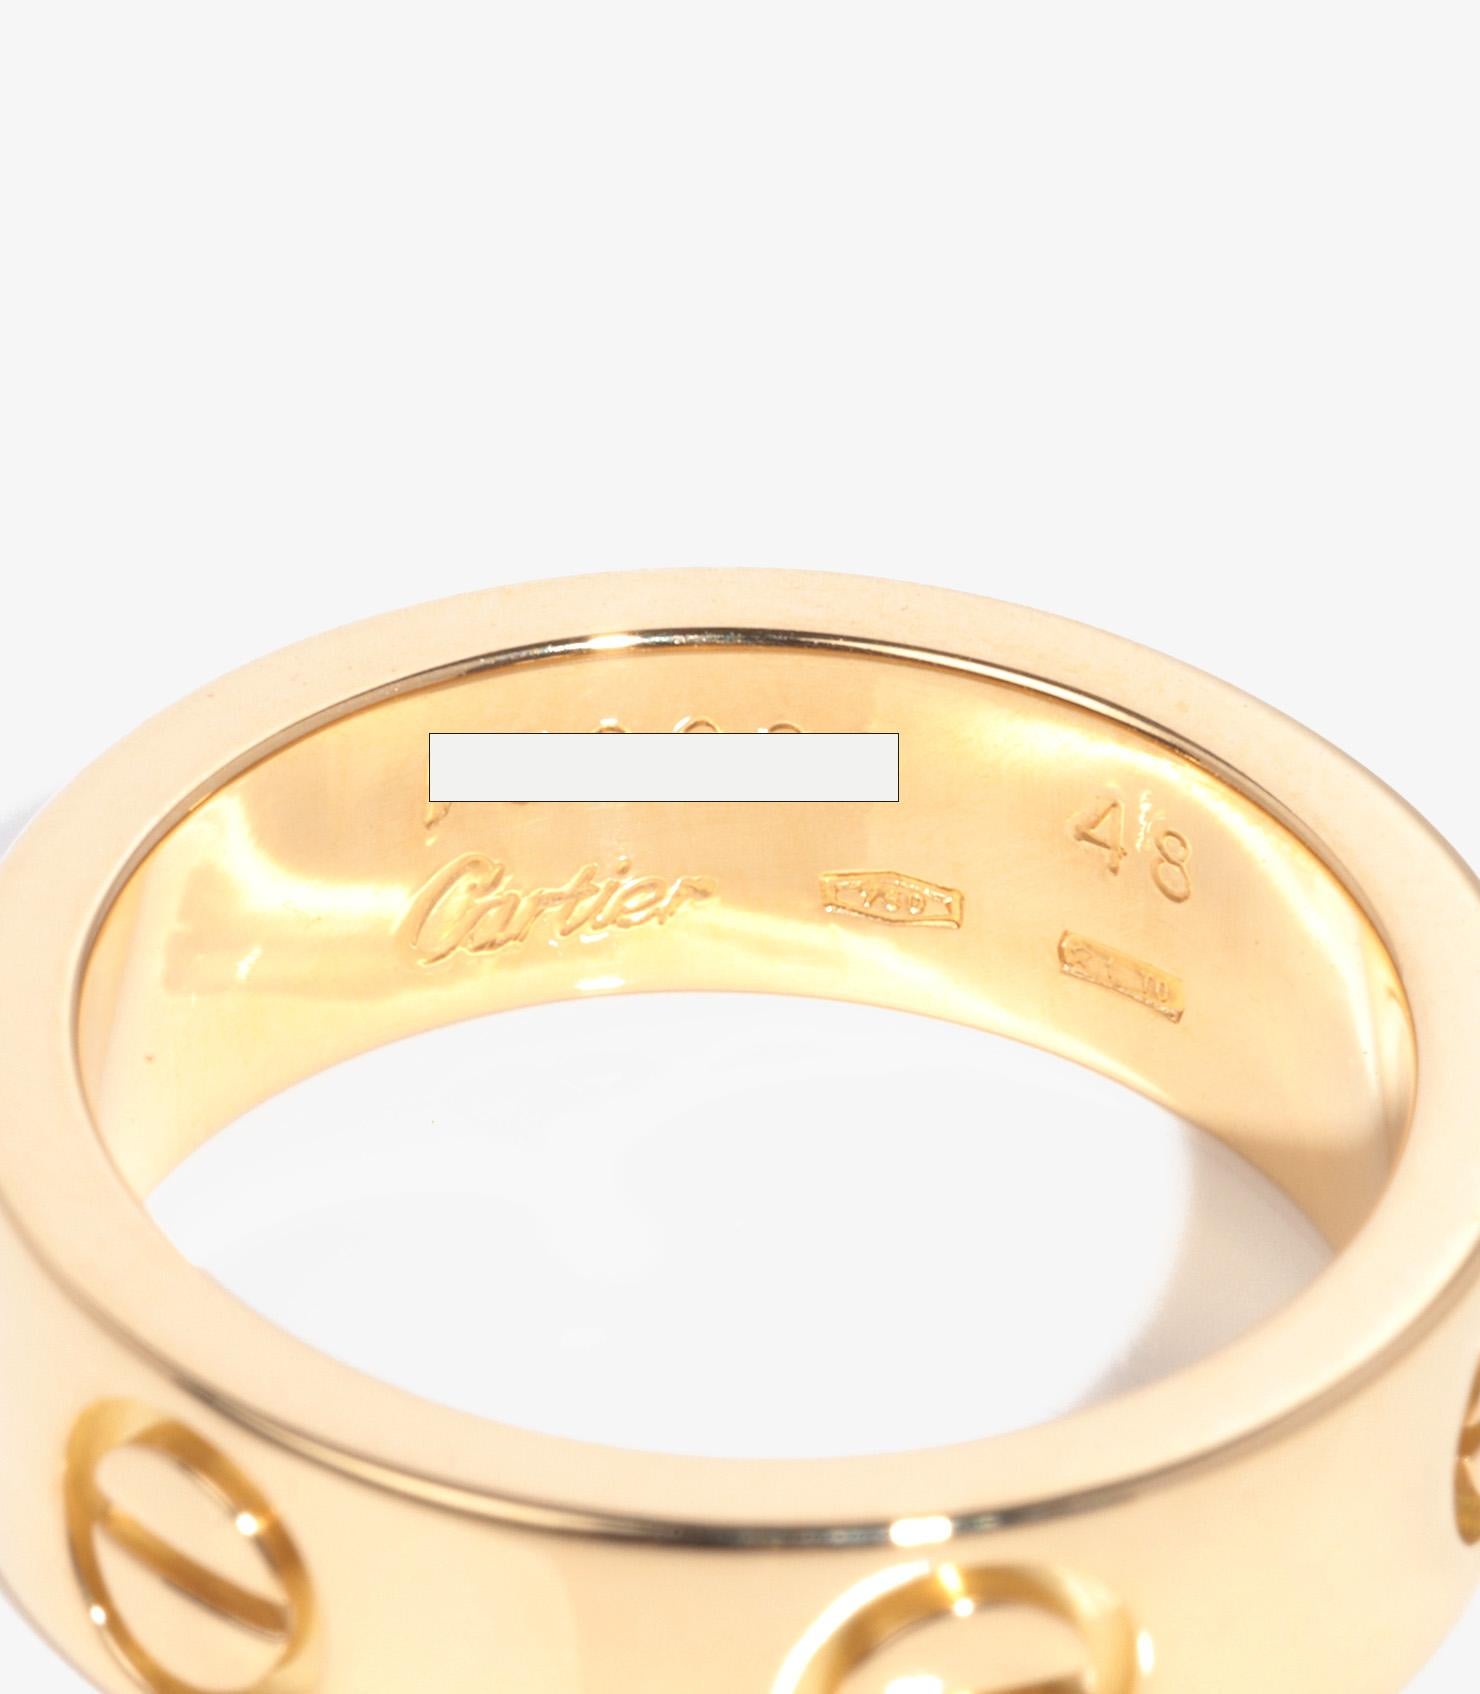 Cartier 18ct Yellow Gold Love Band Ring In Excellent Condition For Sale In Bishop's Stortford, Hertfordshire